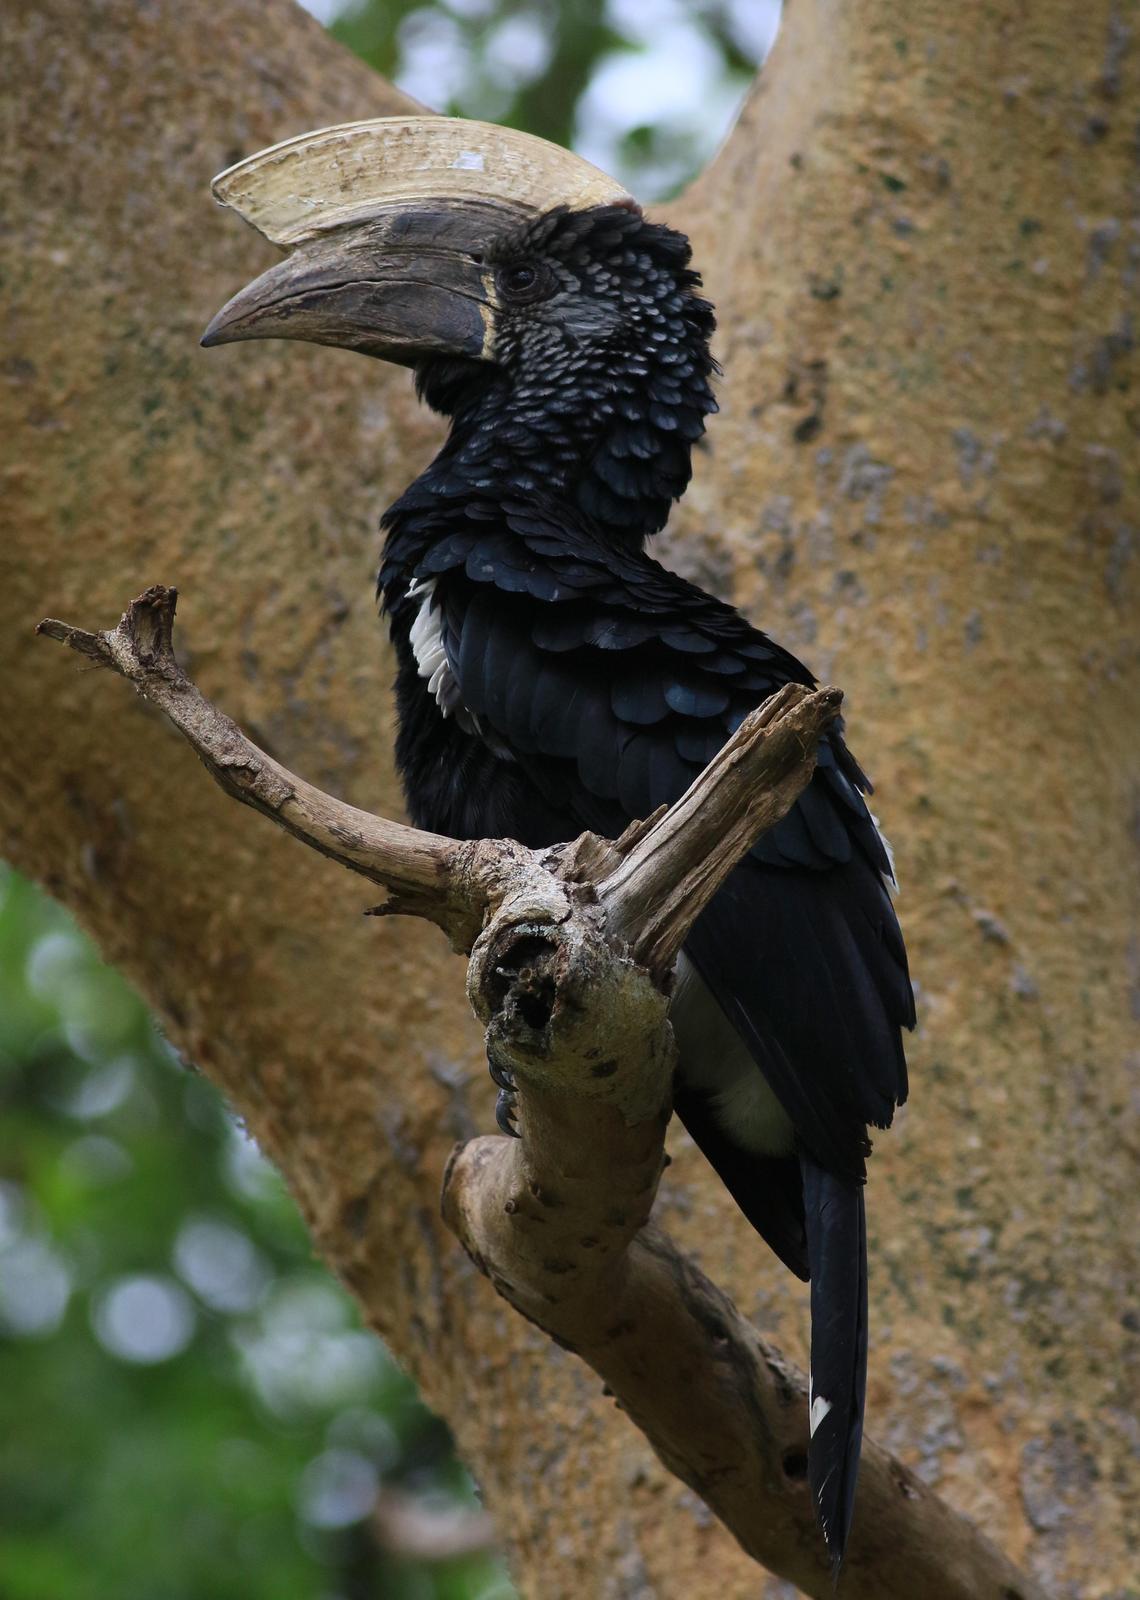 Silvery-cheeked Hornbill Photo by Pat Schleiffer